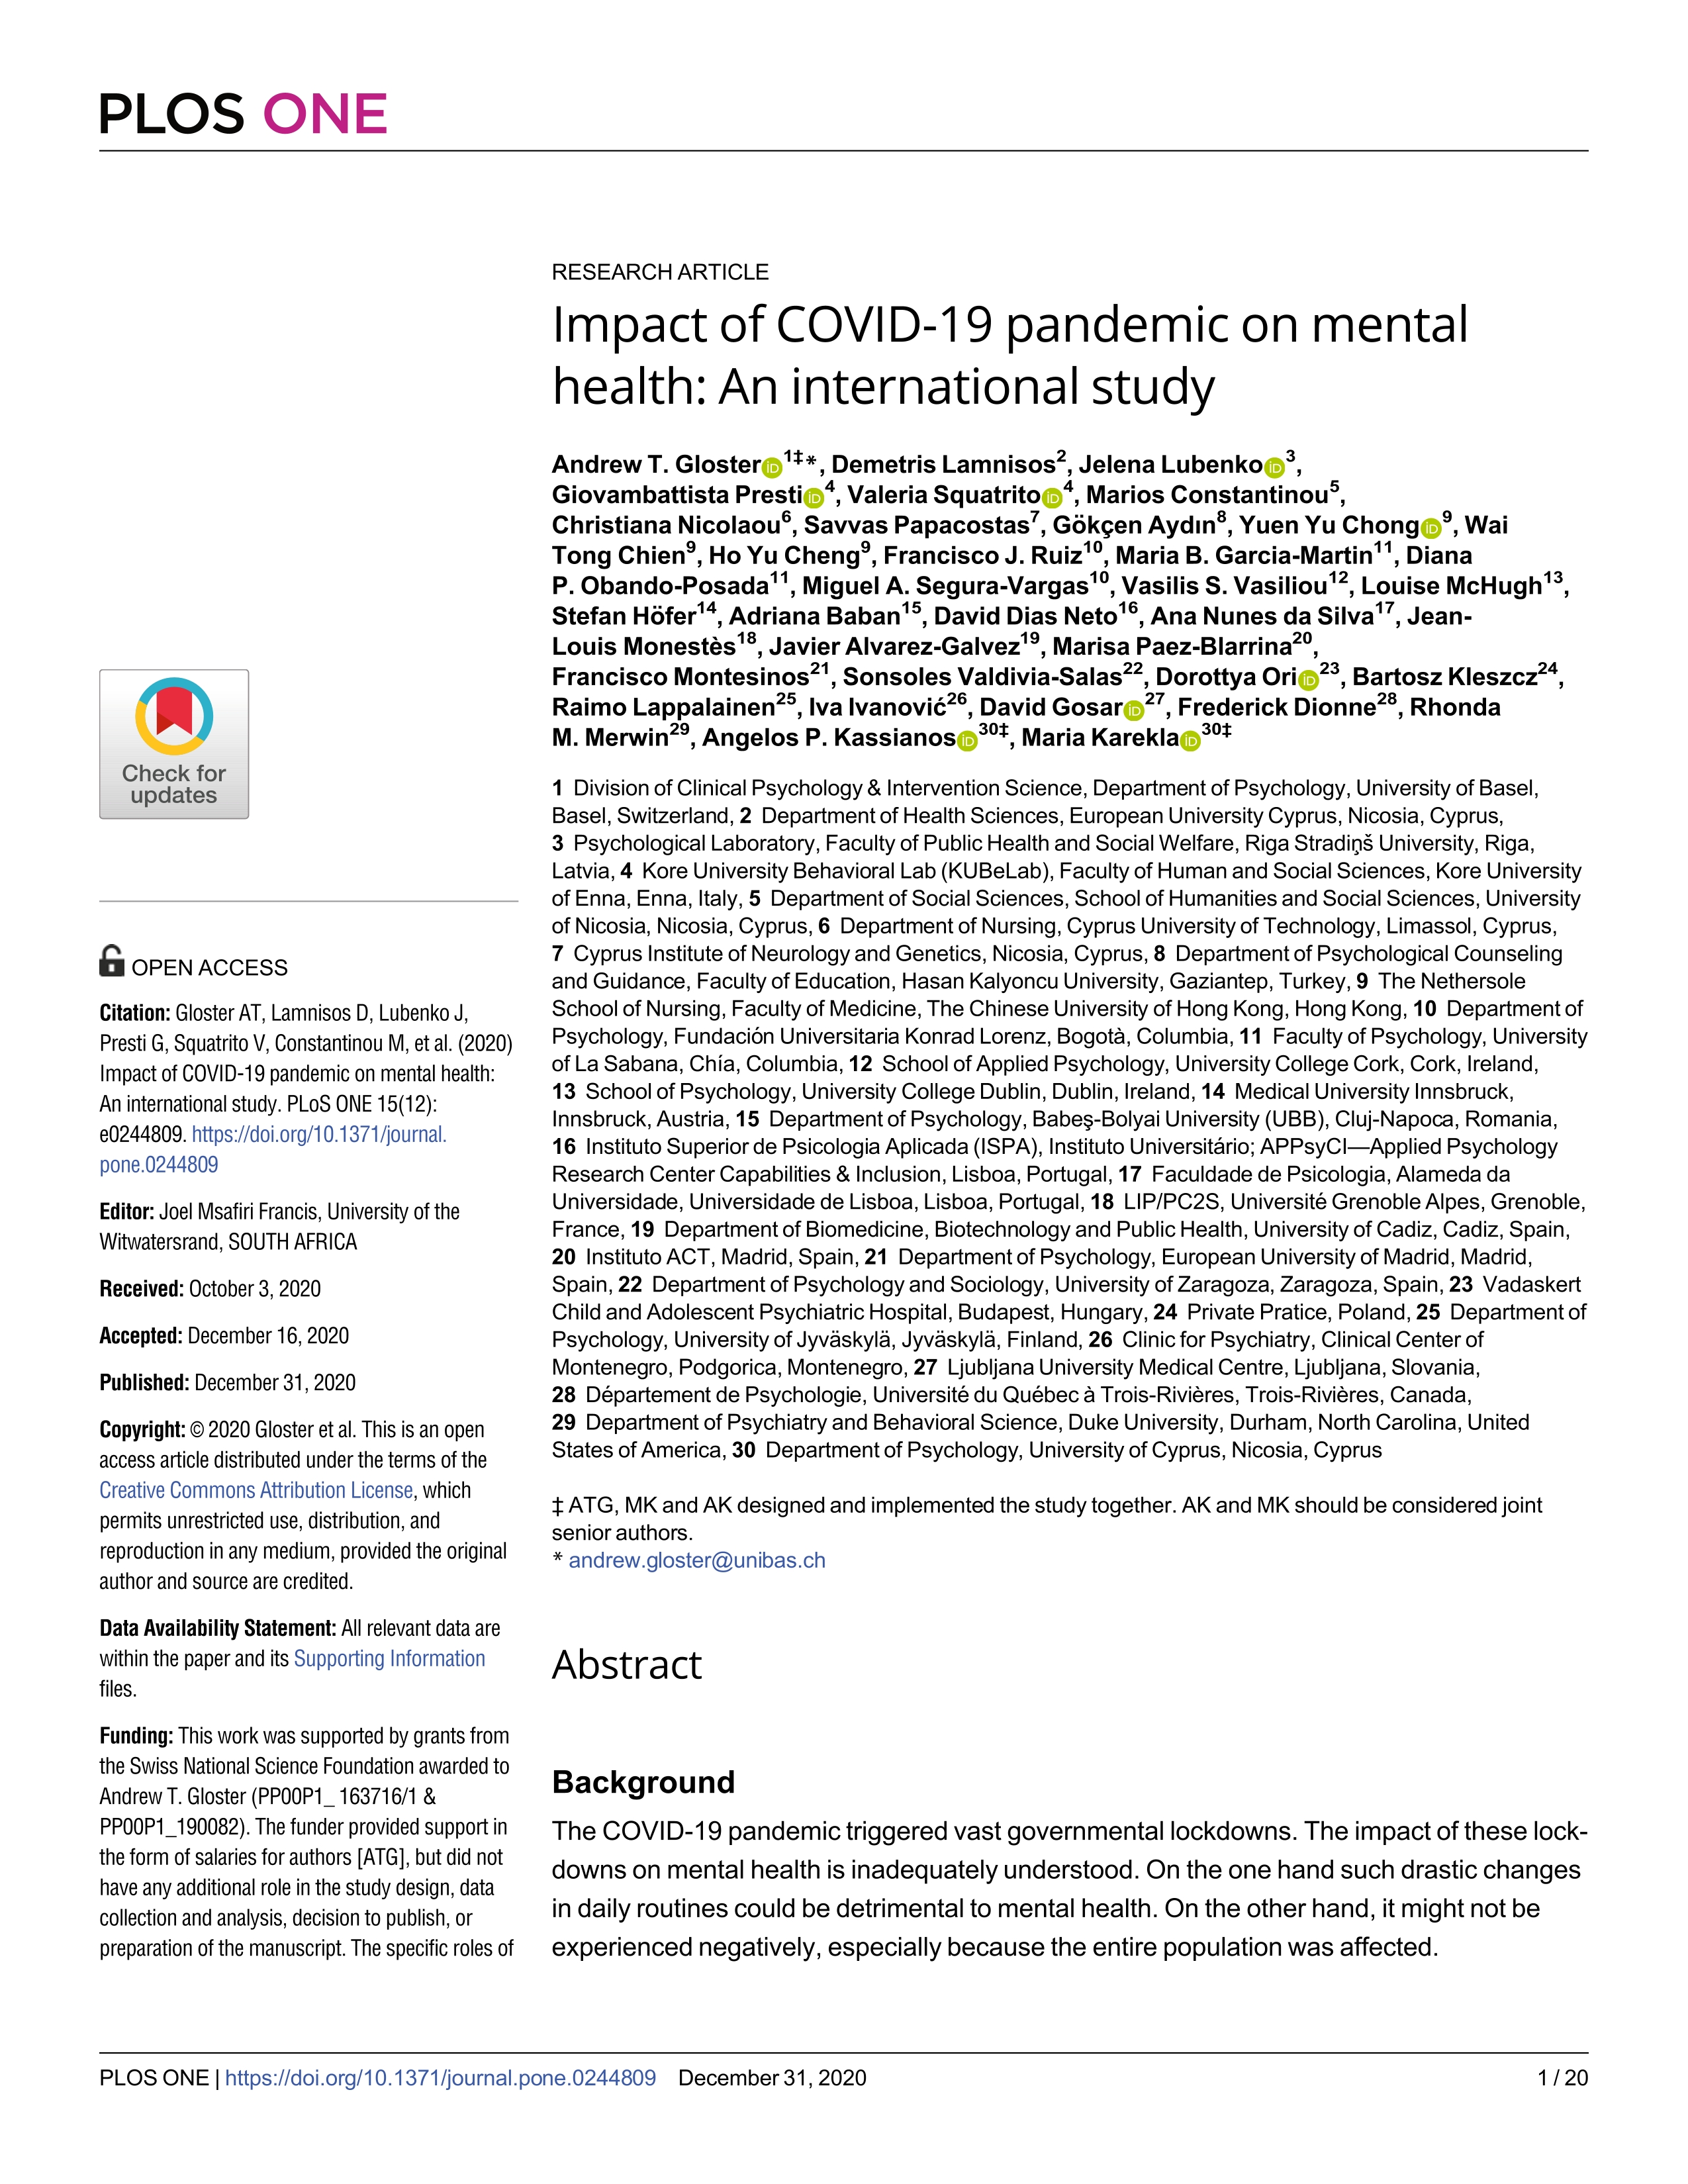 Impact of COVID-19 pandemic on mental health: An international study